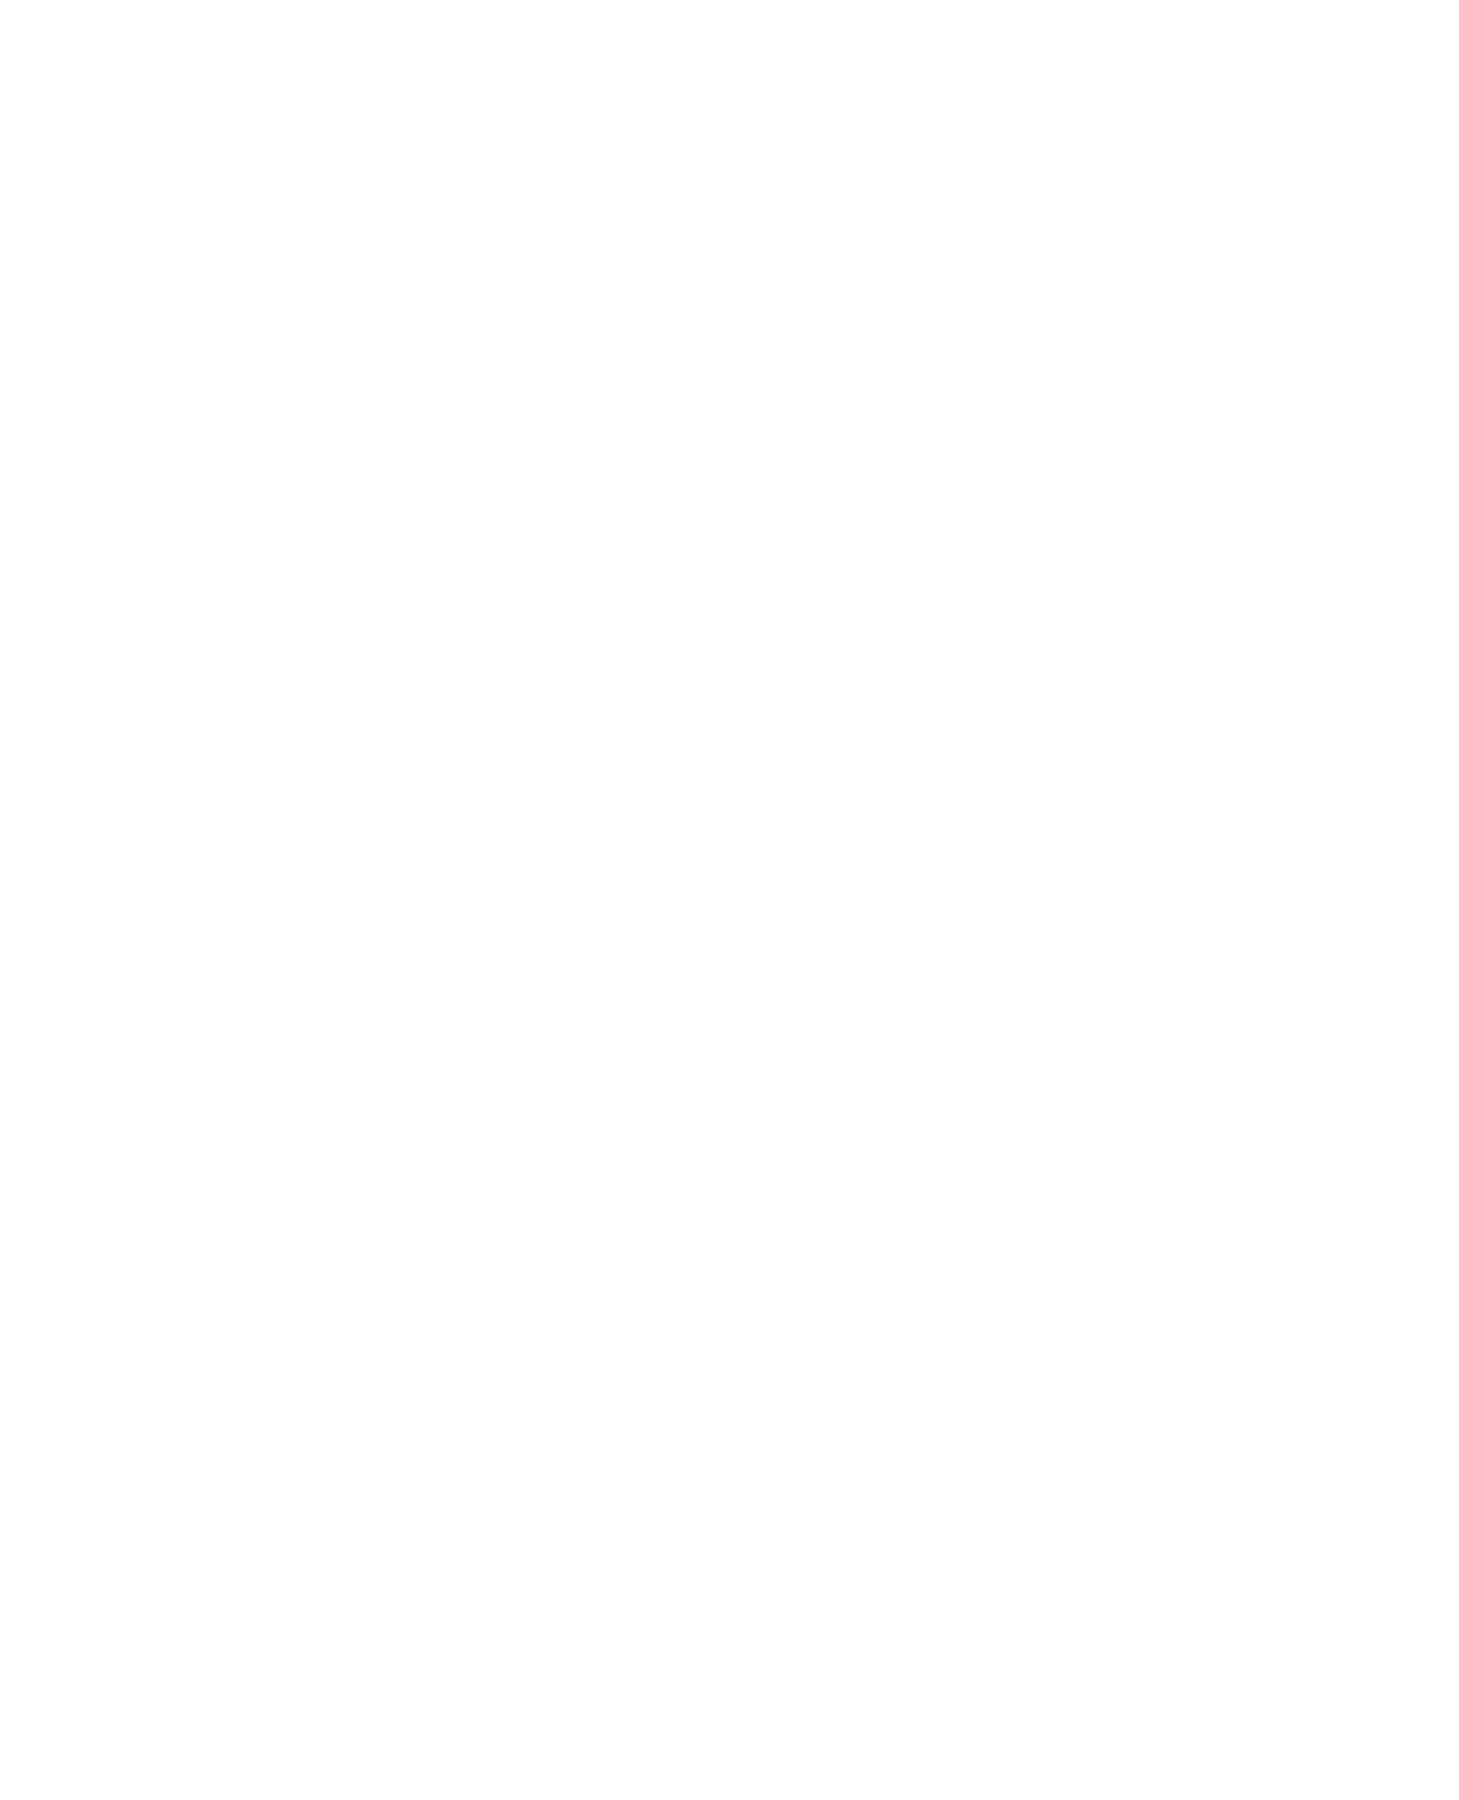 Christmas-Tales-Basic-with-text-REV.png